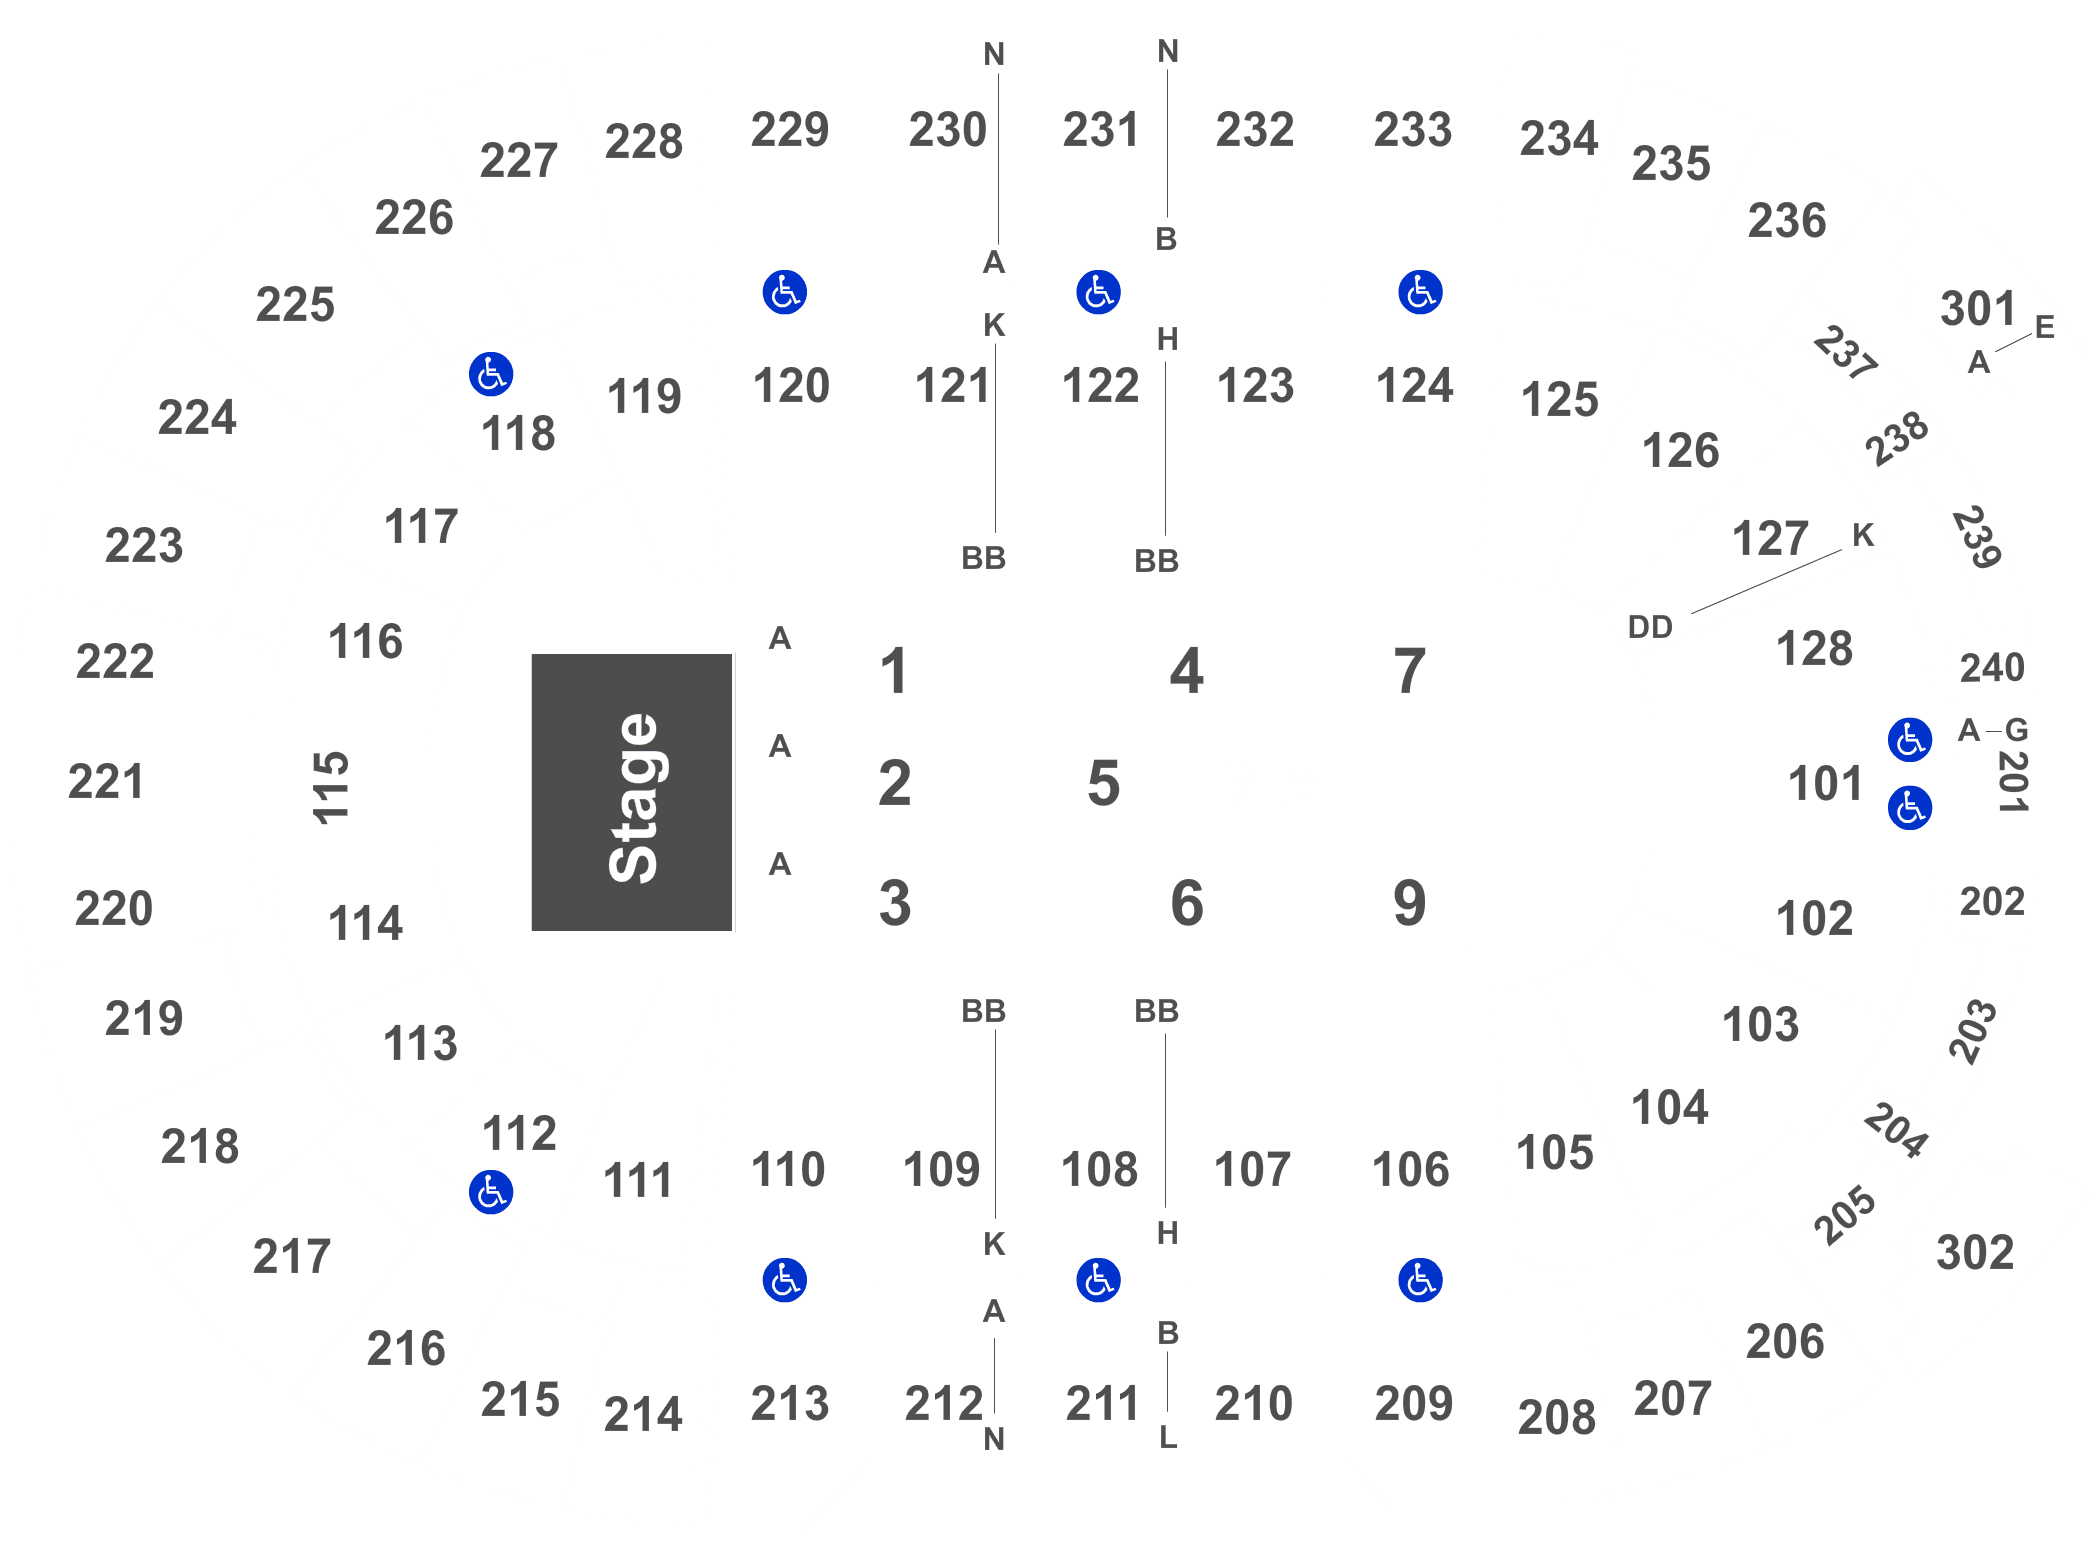 Dunkin Donuts Center Virtual Seating Chart